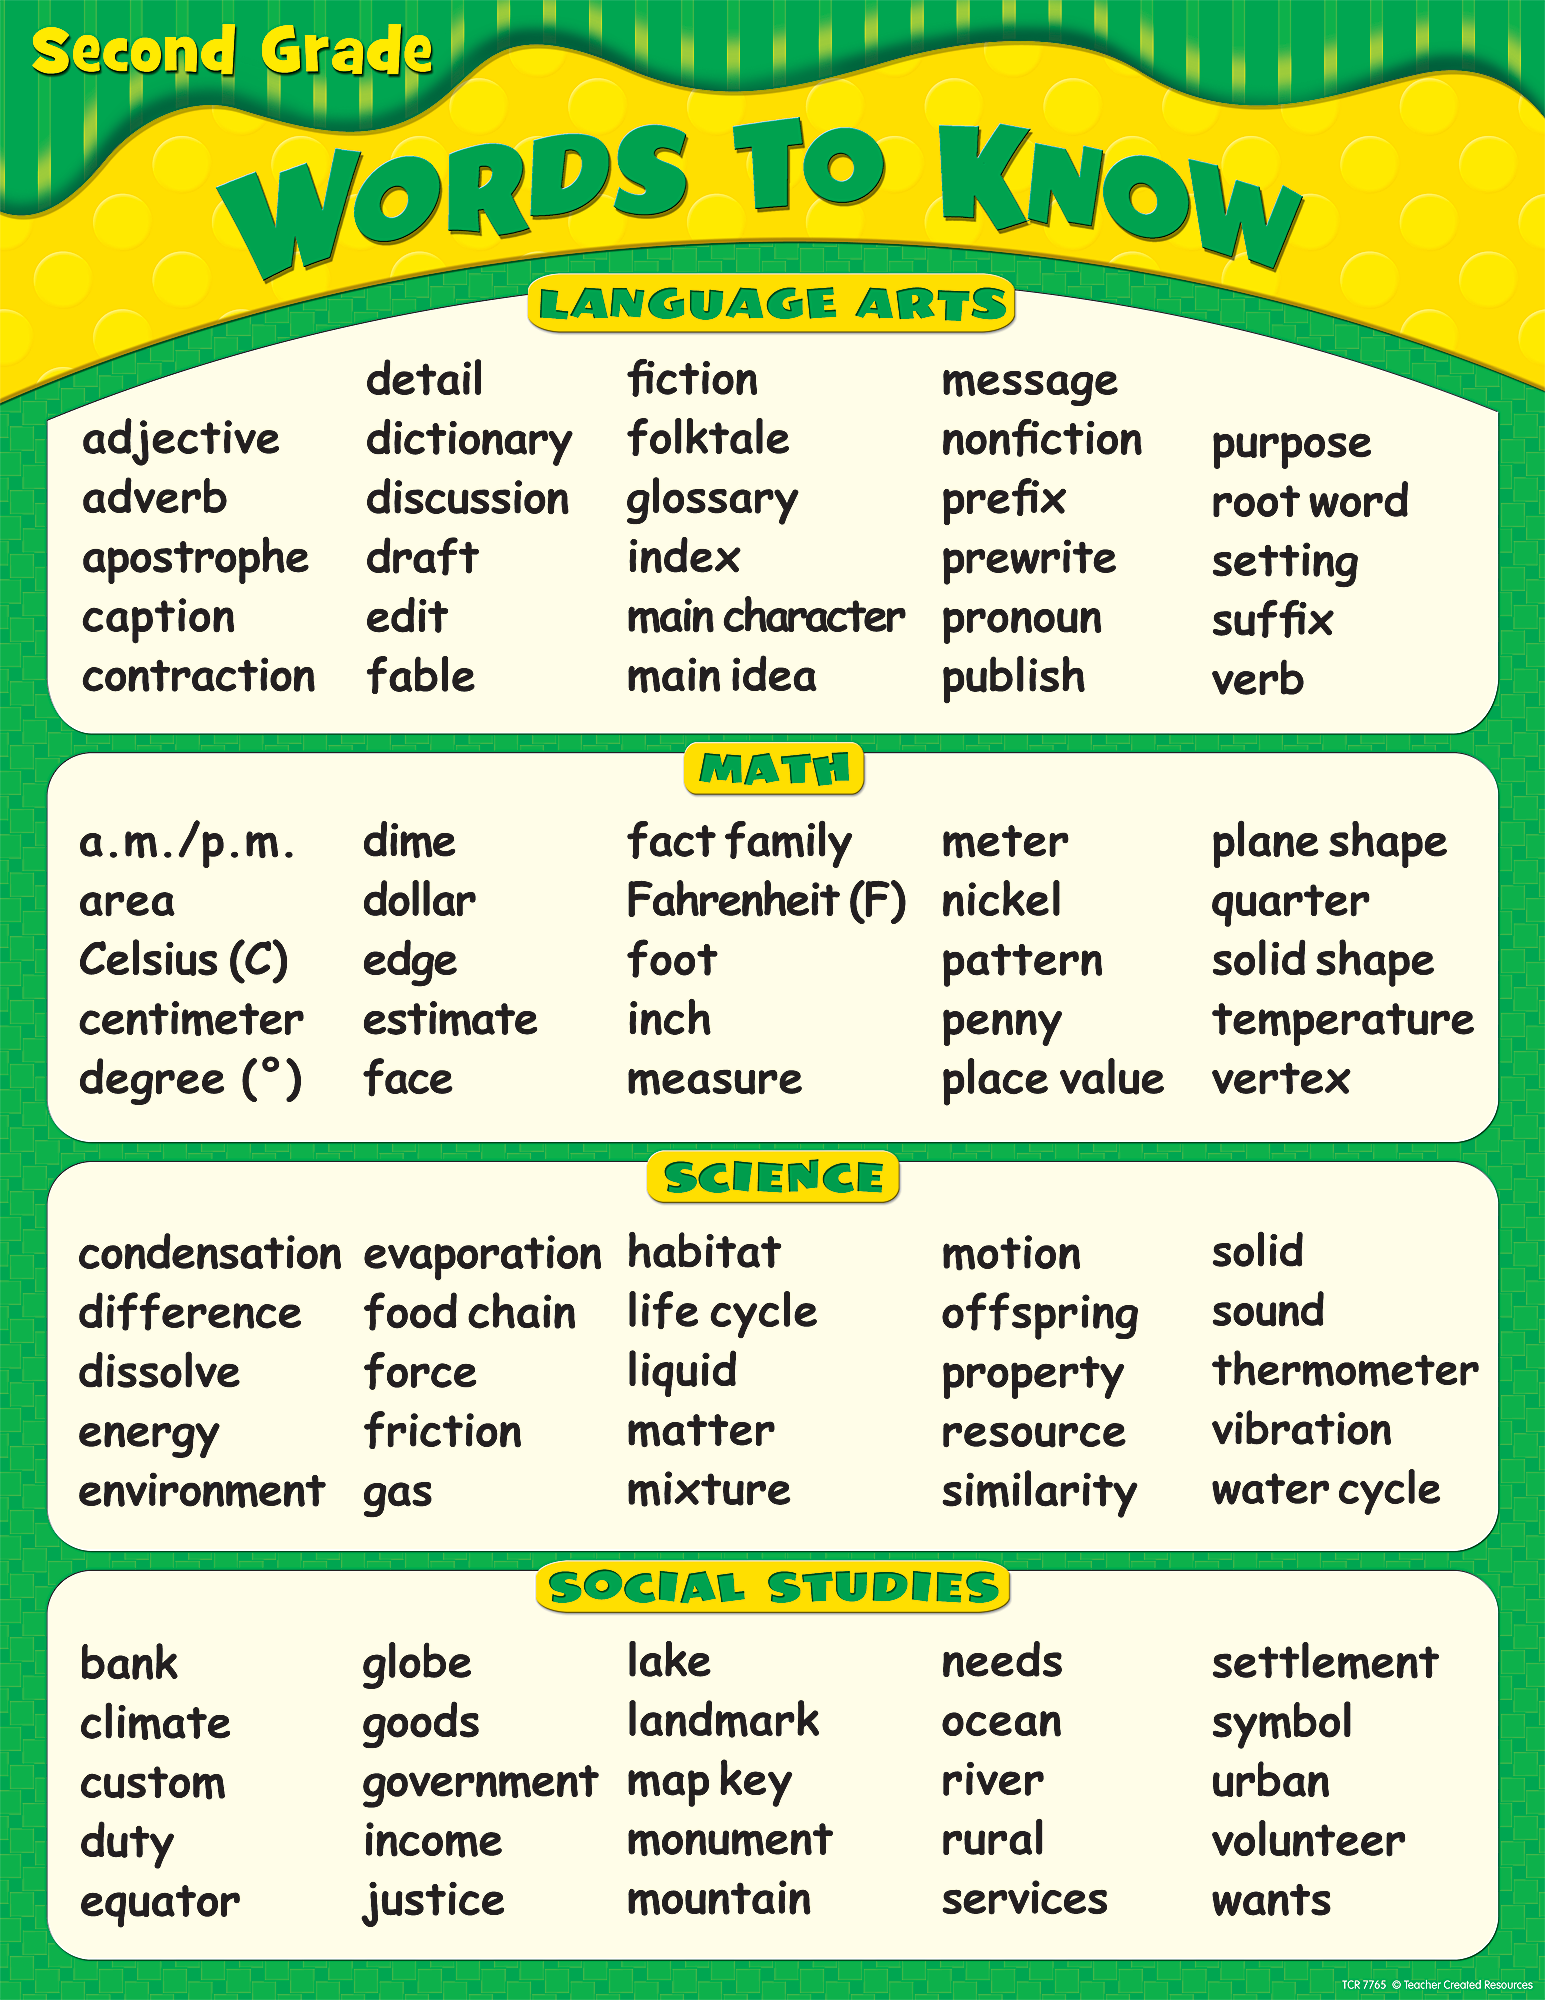 Words To Know in 2nd Grade Chart - TCR7765 | Teacher ...